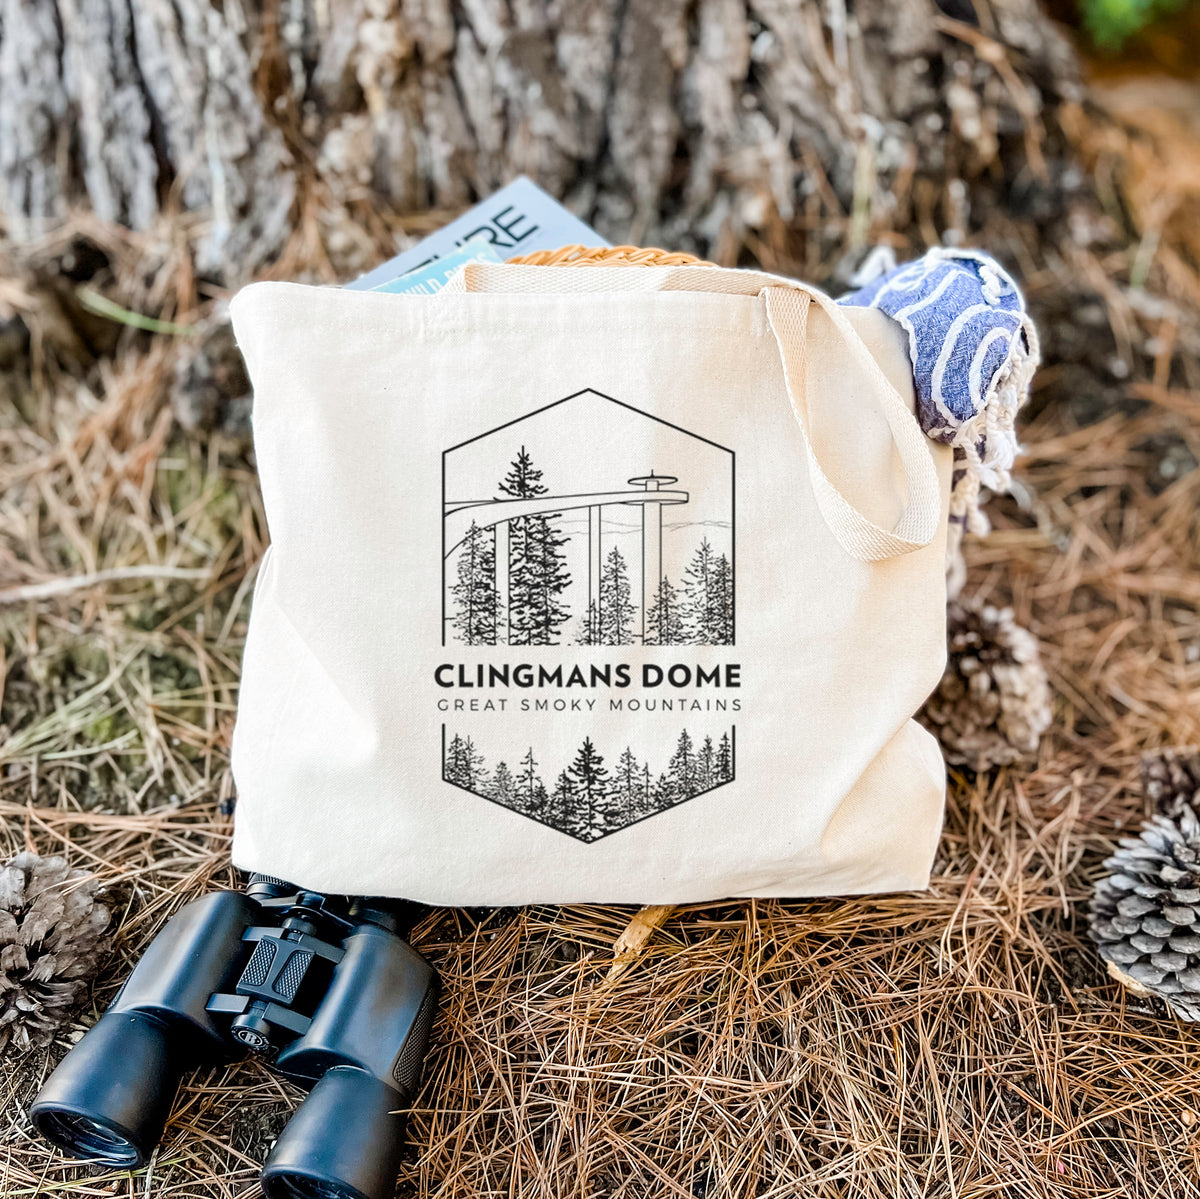 Clingmans Dome - Great Smoky Mountains National Park - Tote Bag